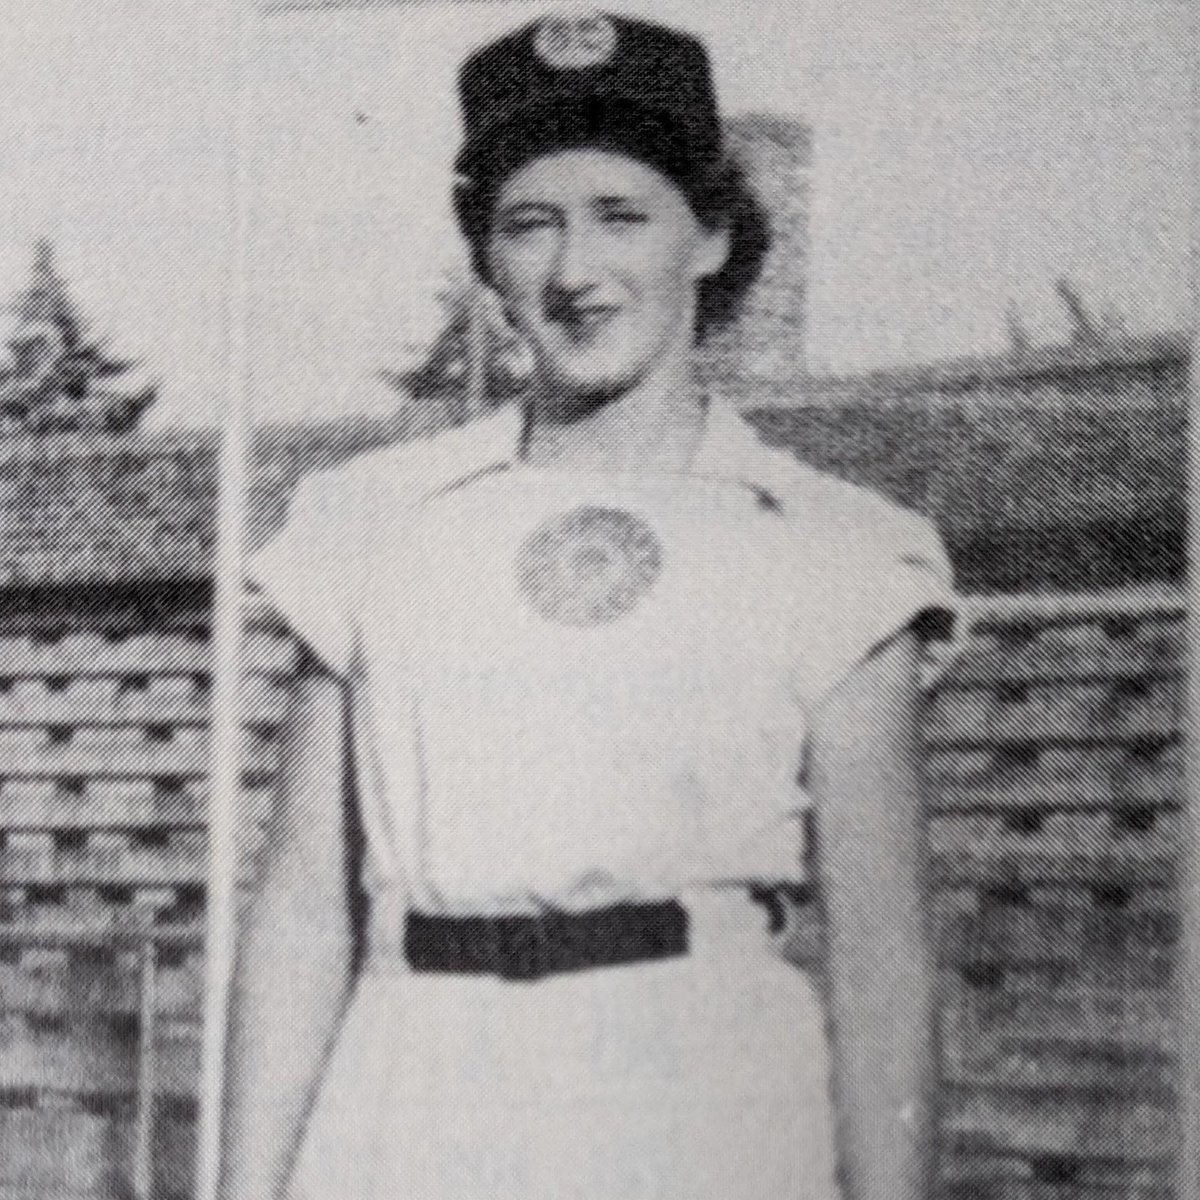 Mary Moore, 2B for the Battle Creek Belles, pictured at Bailey Park. #WomensHistoryMonth #AAGPBL #ALOTO